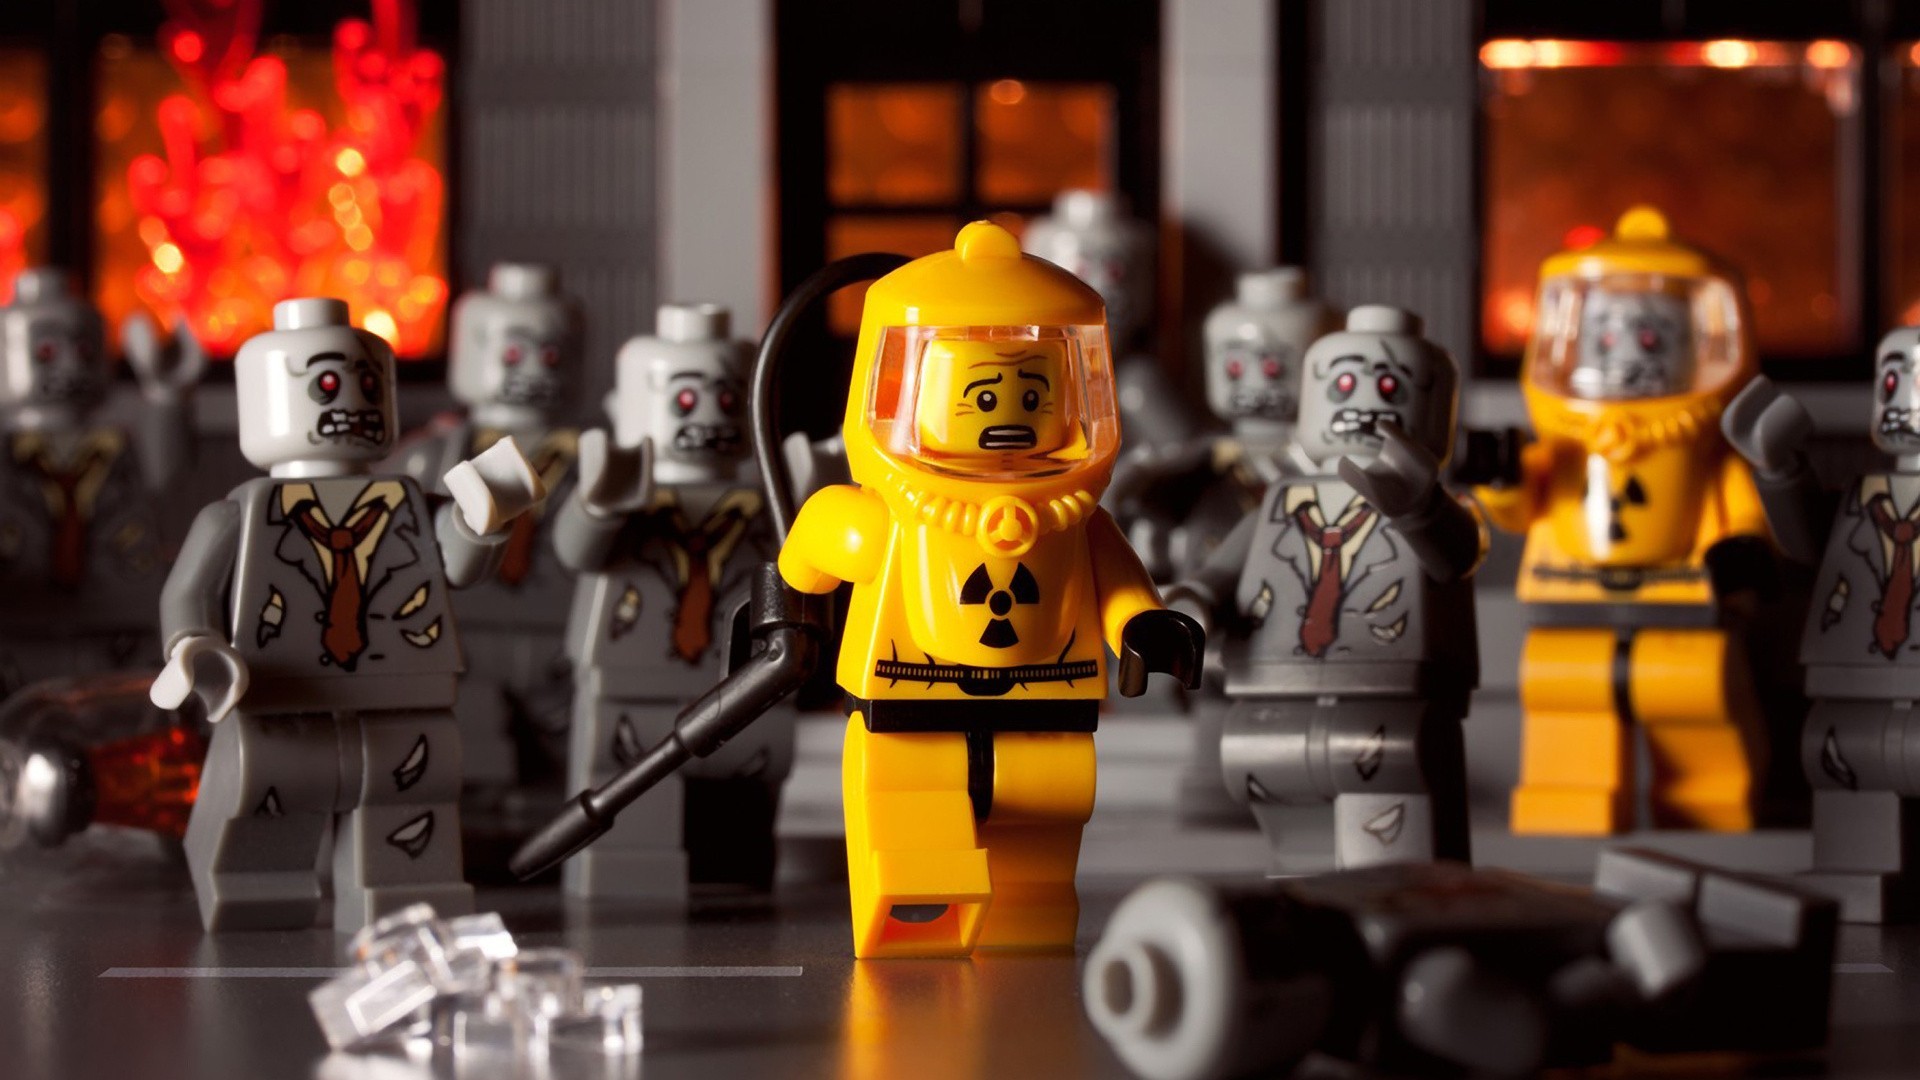 General 1920x1080 zombies LEGO toys humor figurines